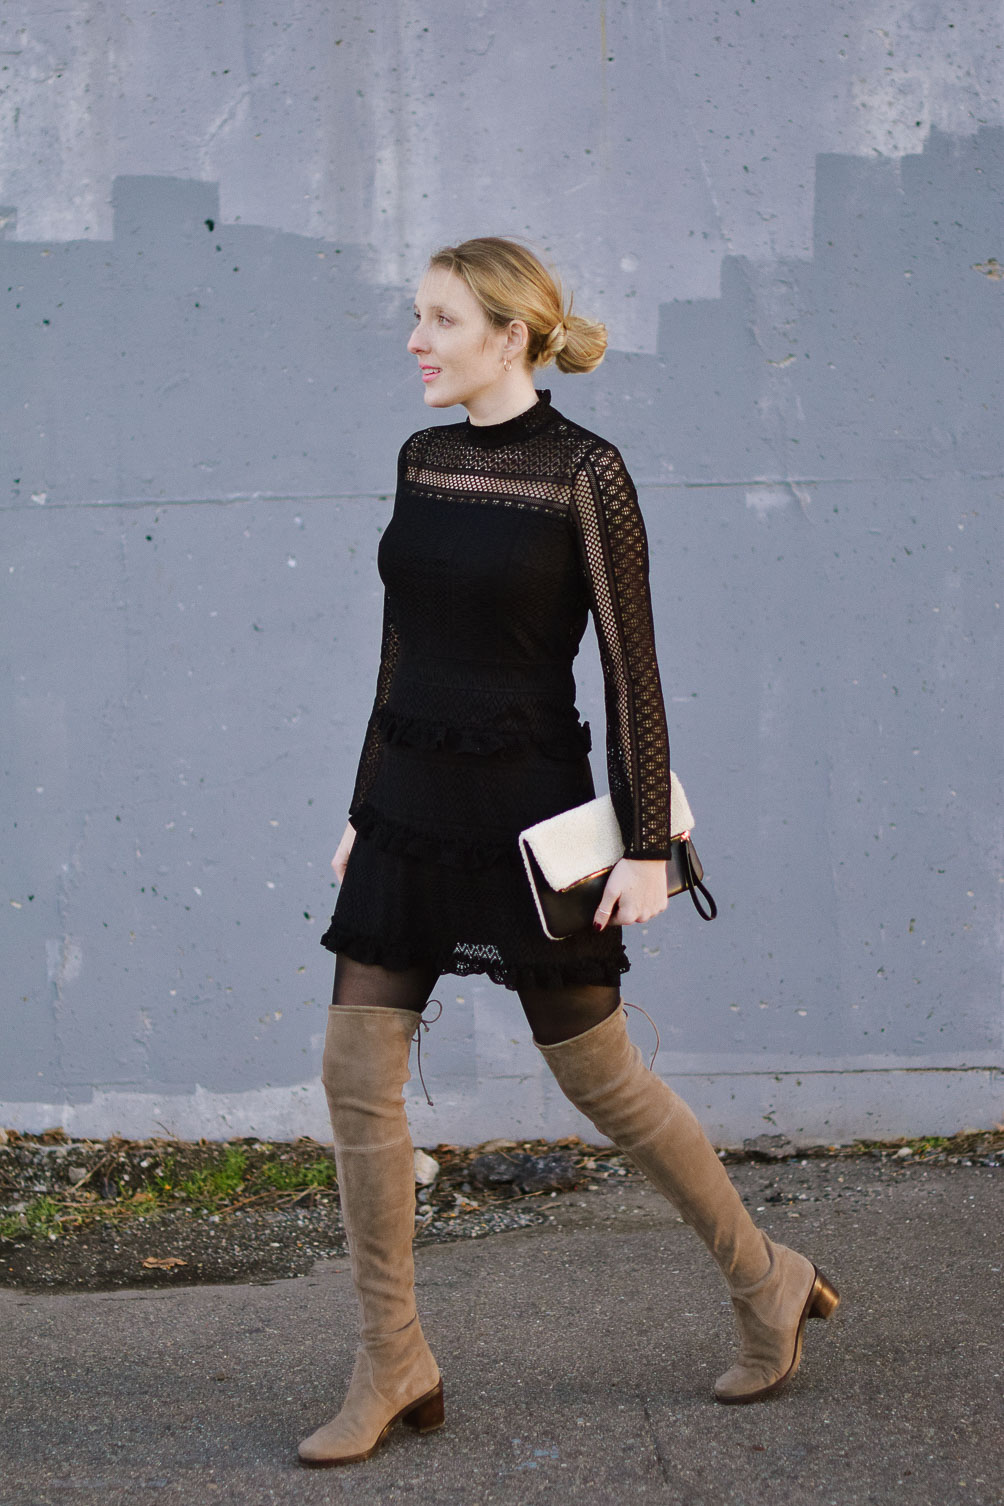 winter outfit inspiration with black lace ruffle dress and suede over the knee boots